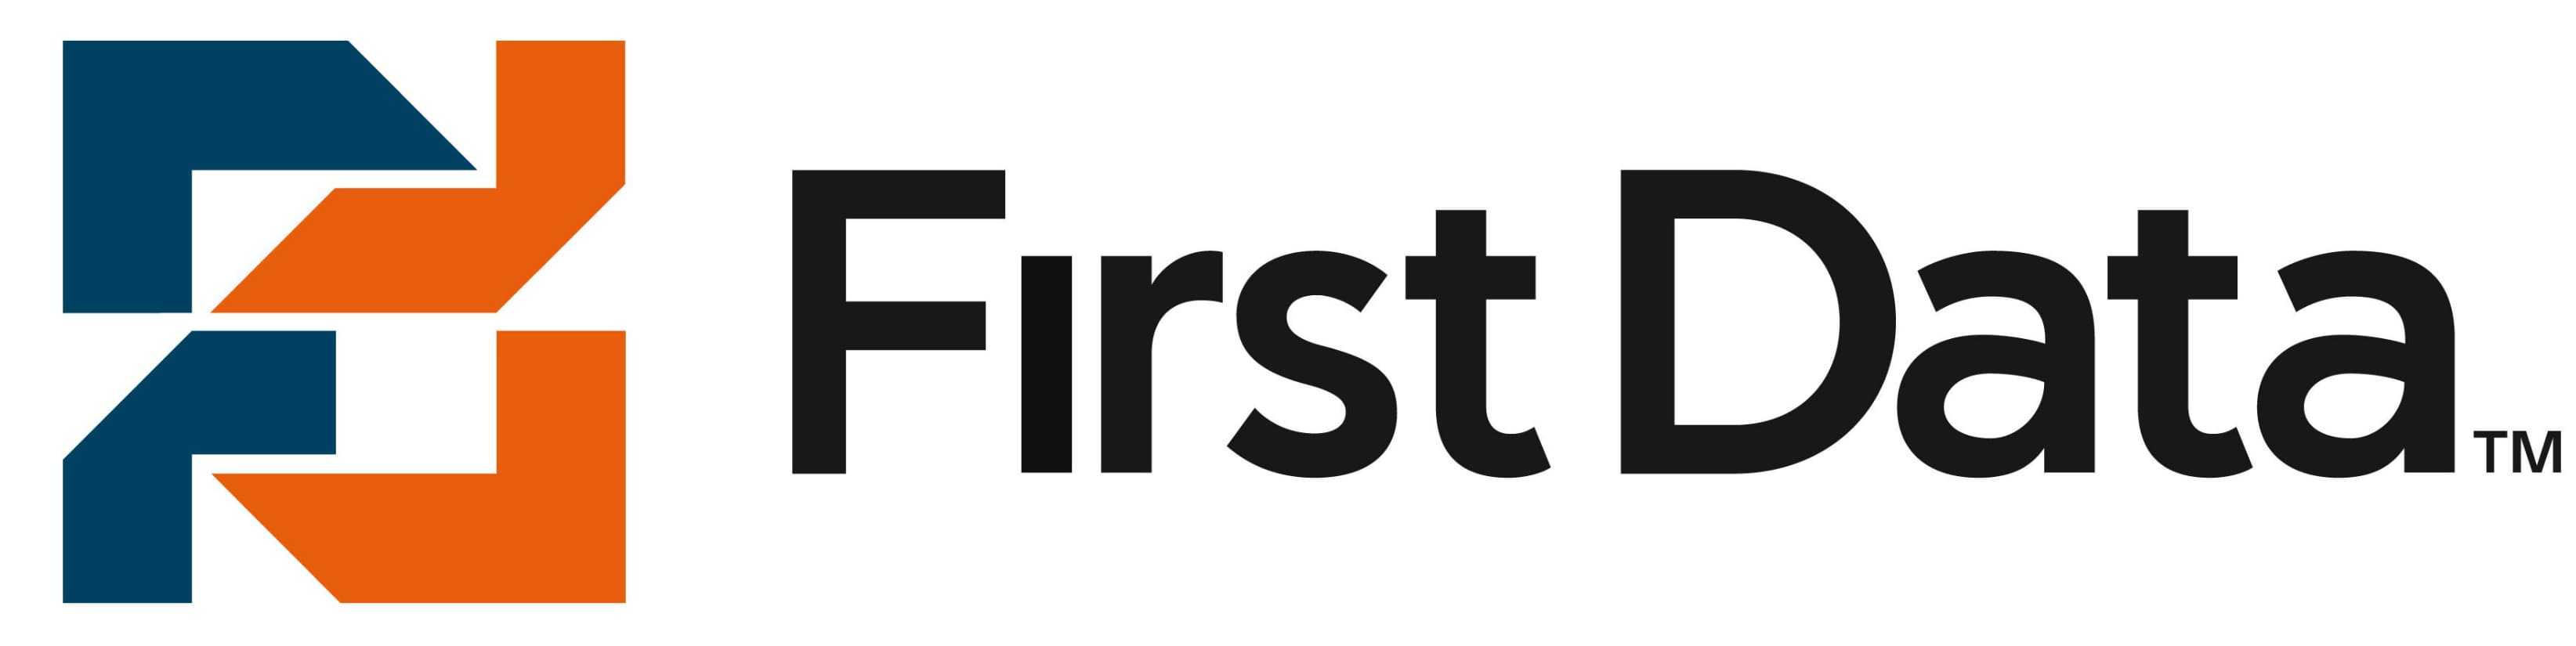 New First Data Logo - First Data. Definitions and Overview